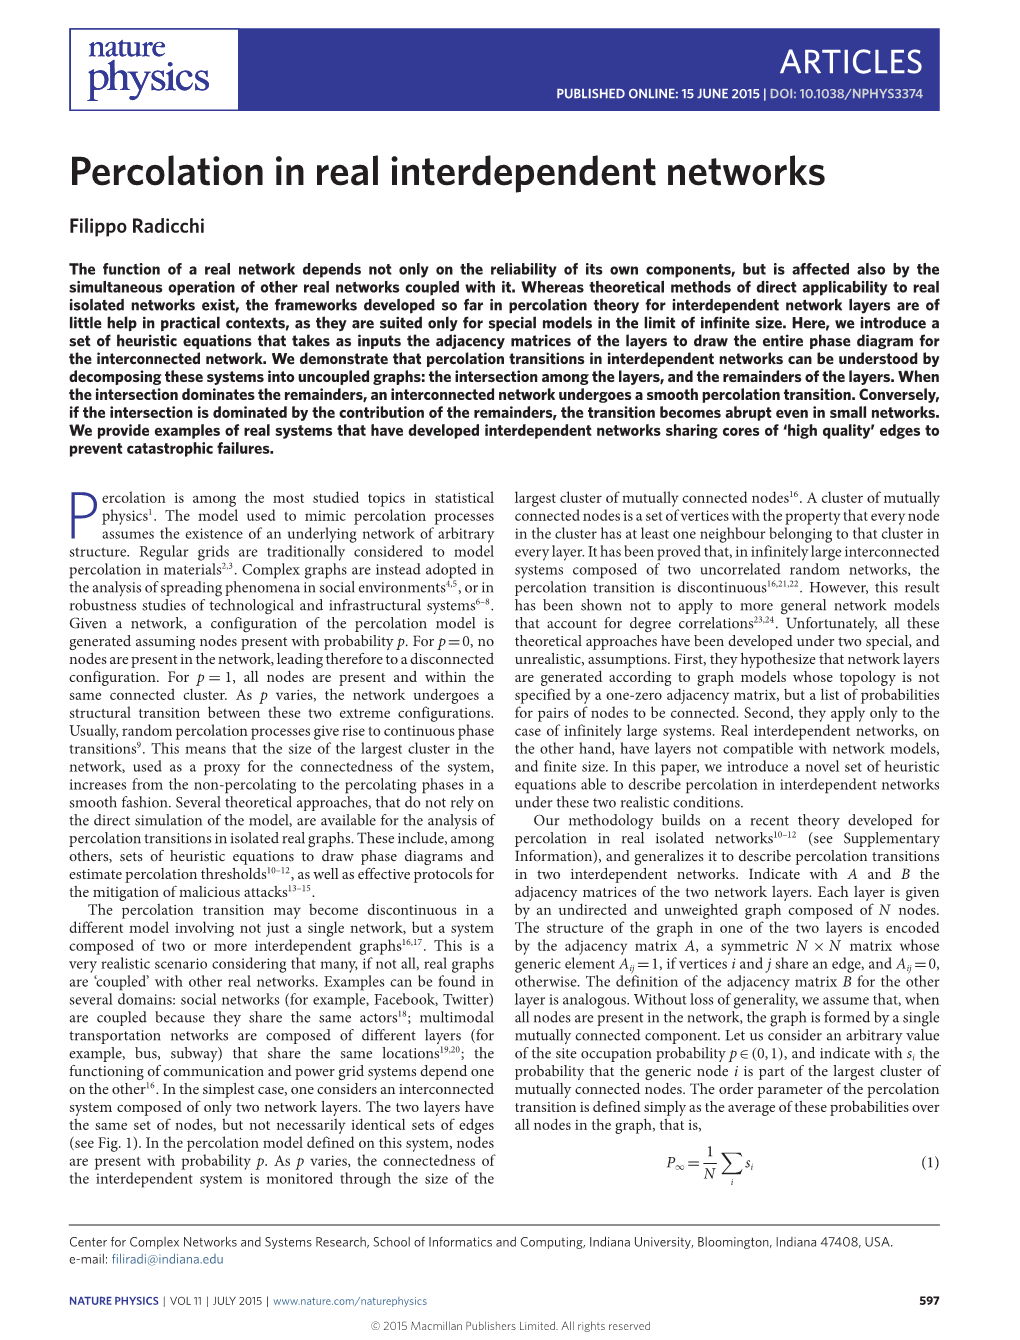 Percolation in Real Interdependent Networks